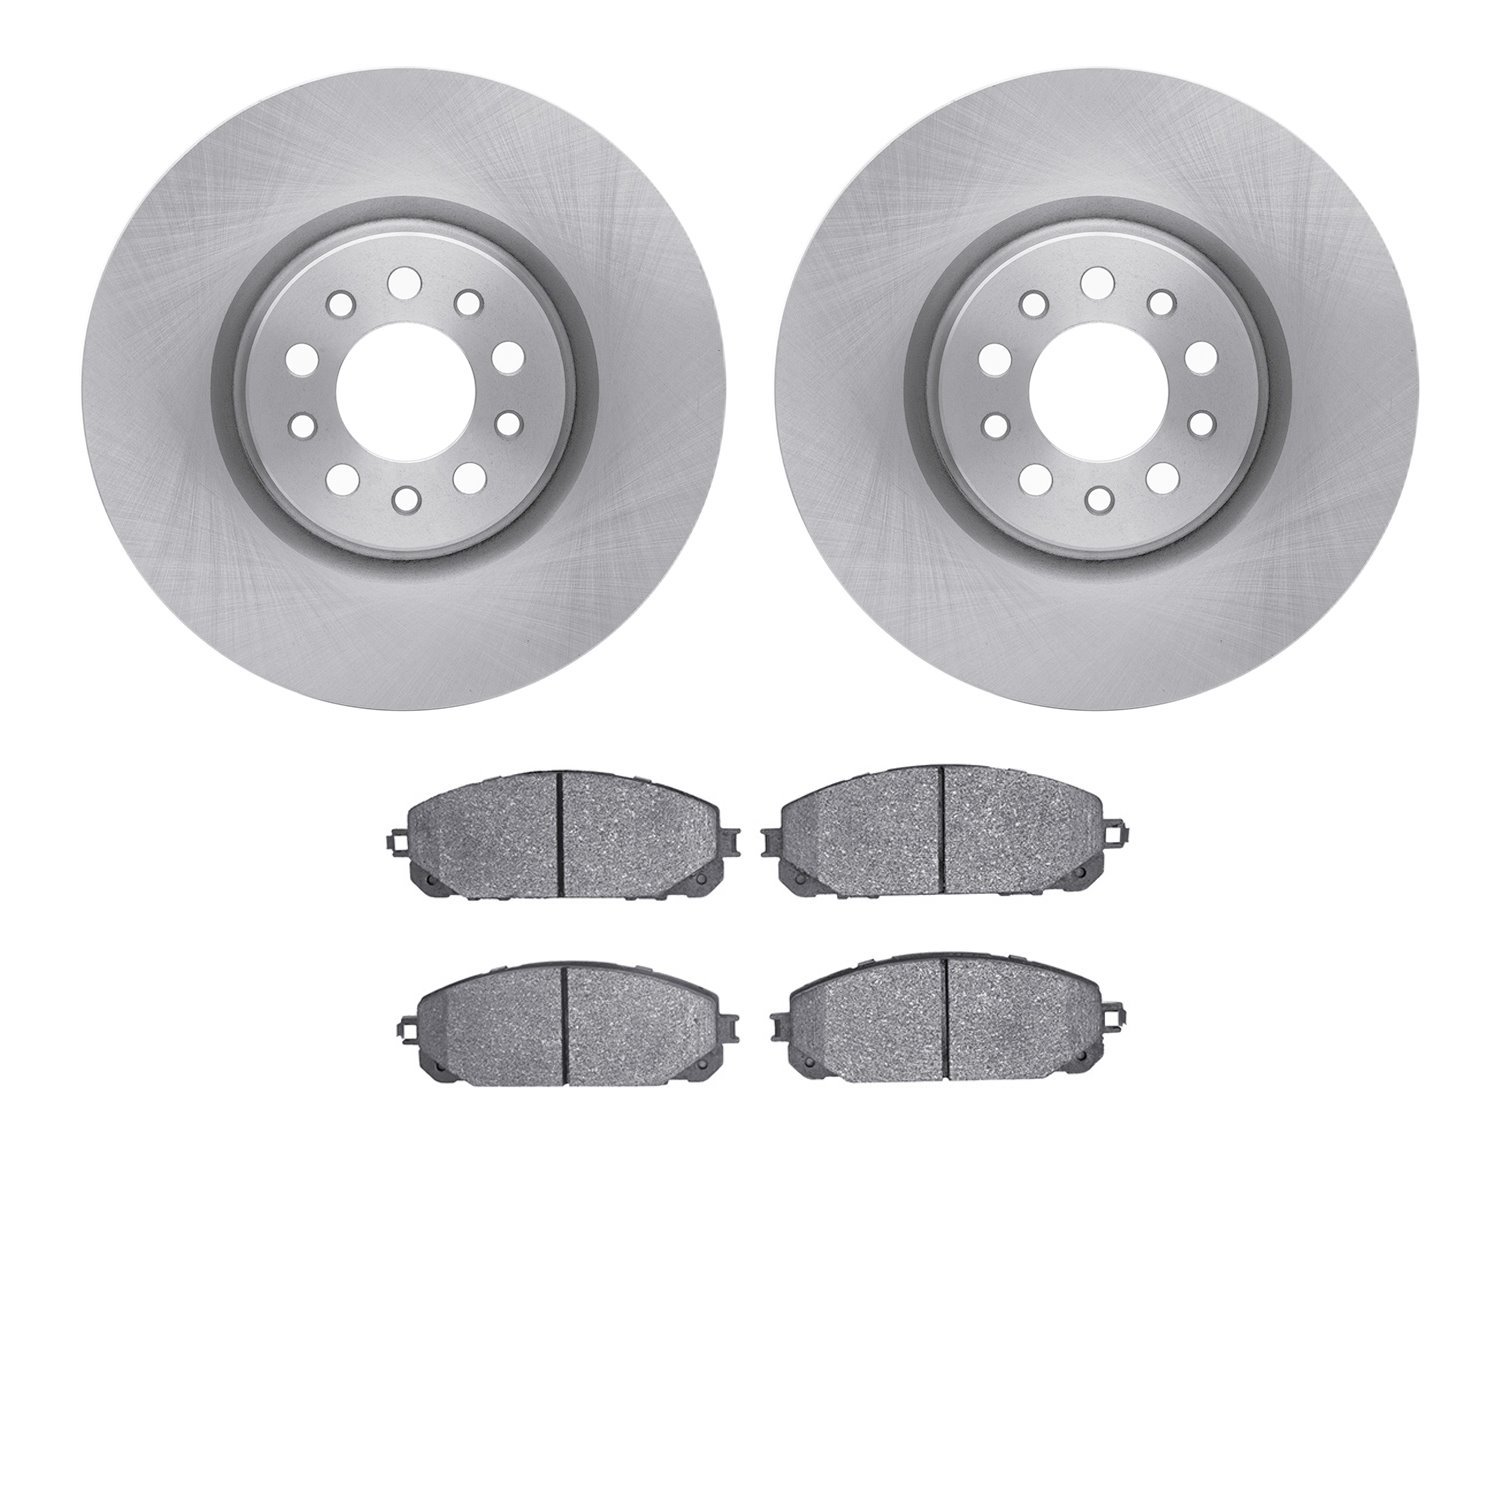 6402-42041 Brake Rotors with Ultimate-Duty Brake Pads, Fits Select Mopar, Position: Front